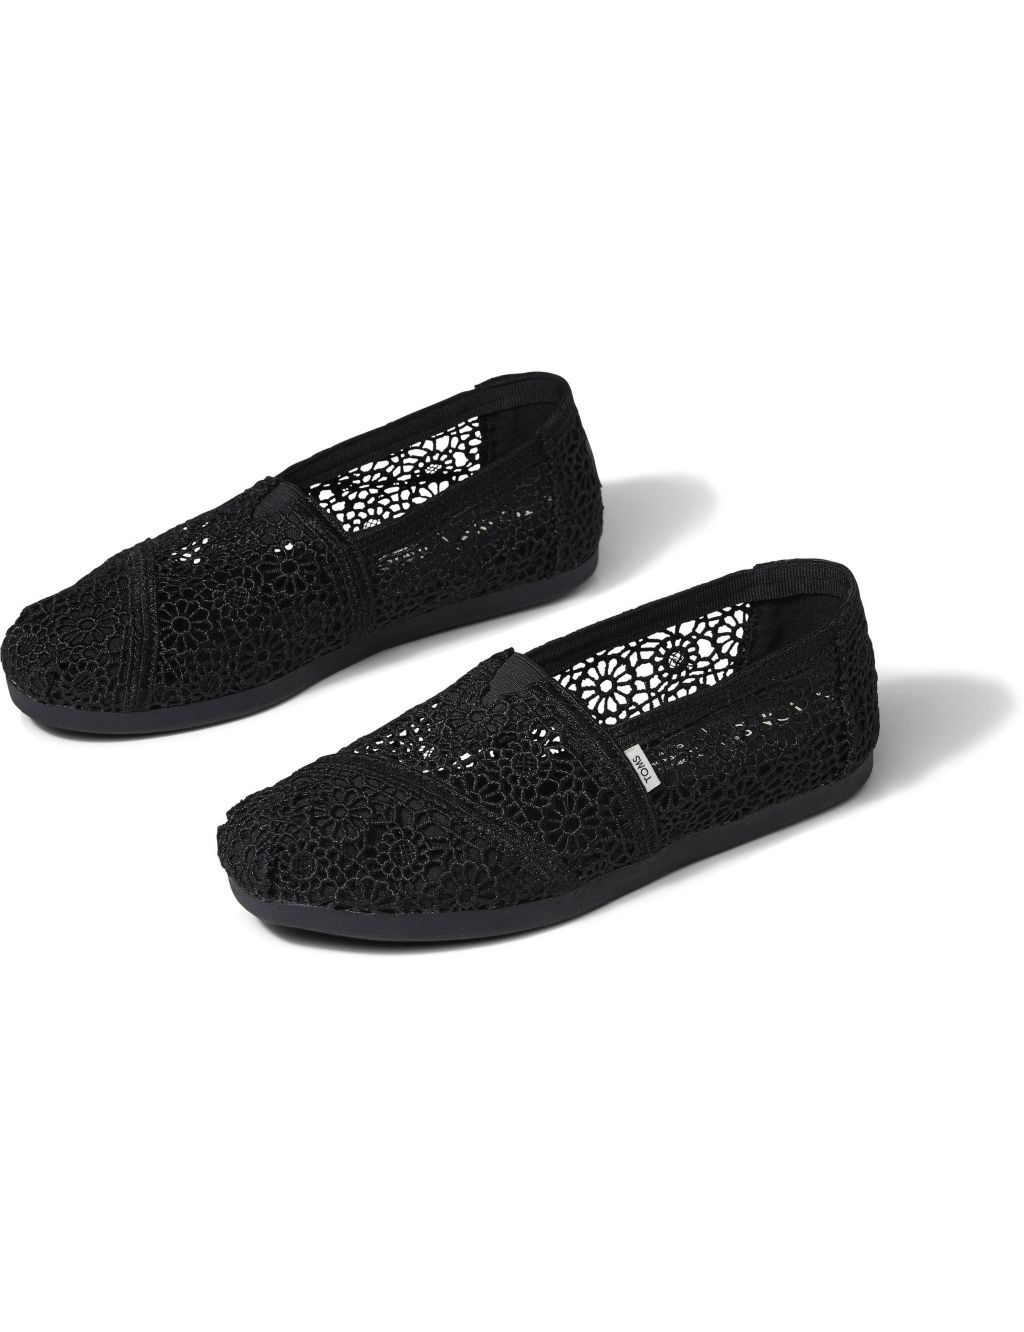 Canvas Embroidered Espadrilles | TOMS | M&S